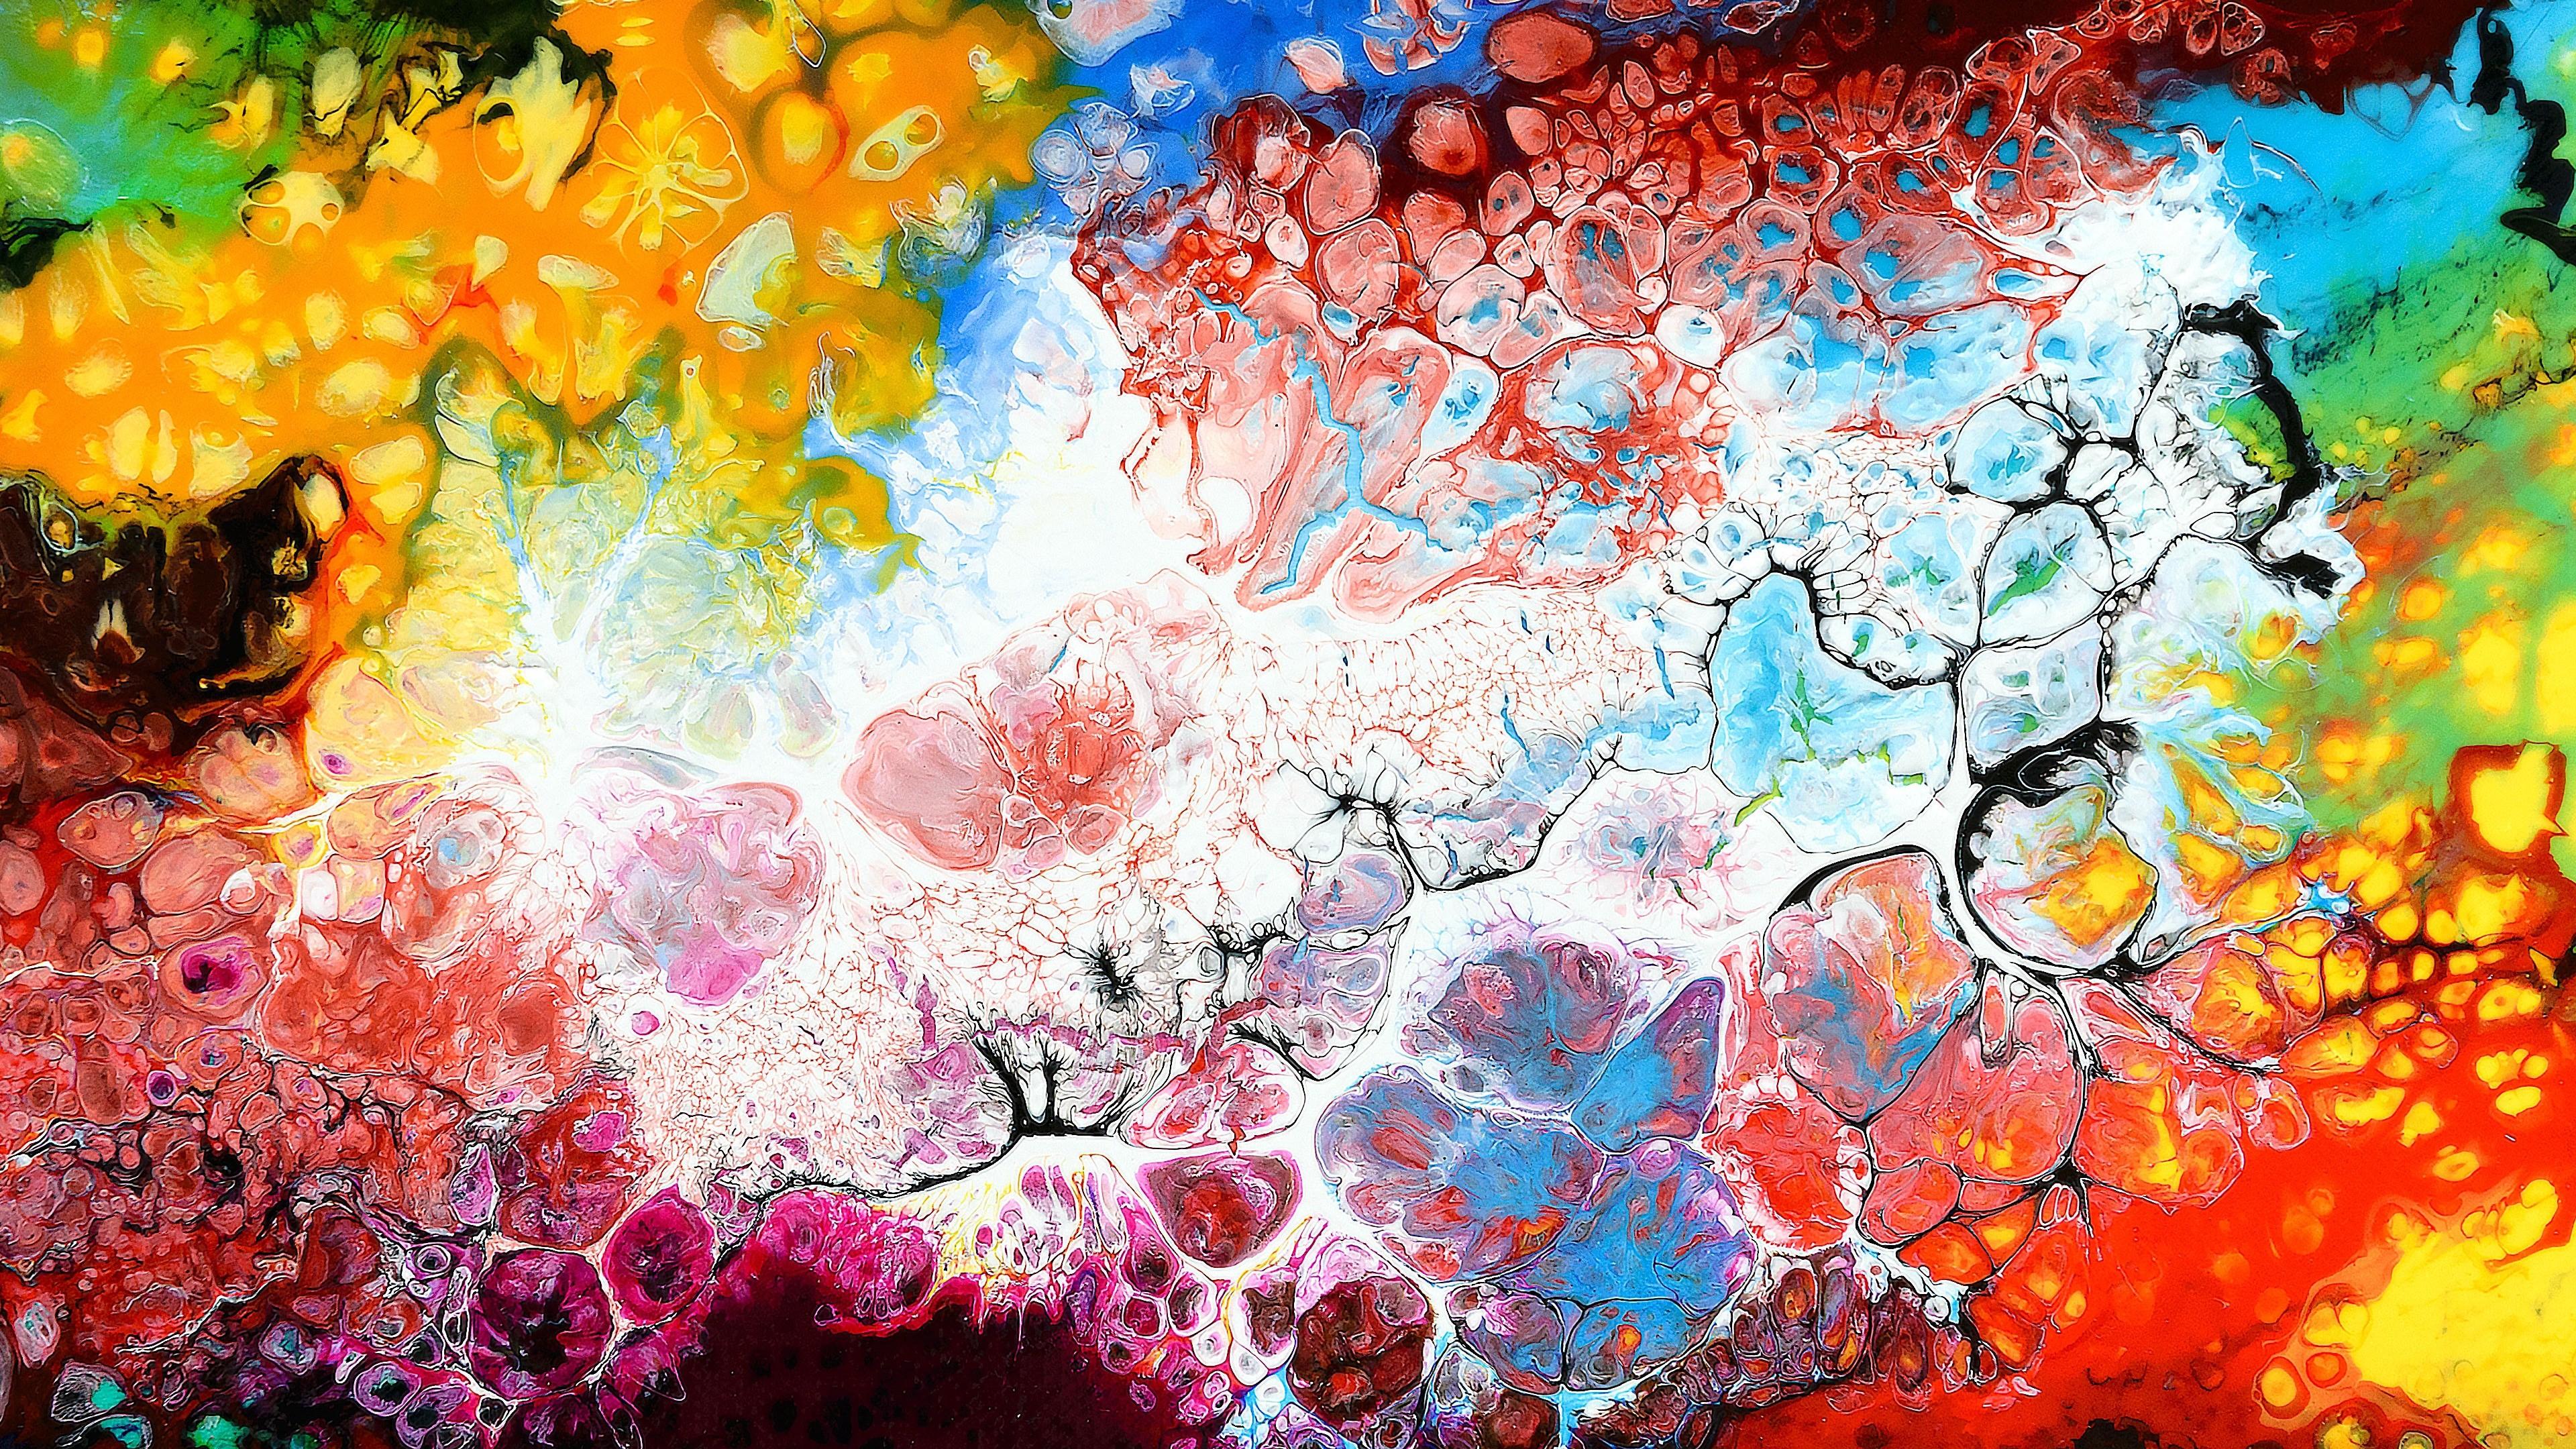 20 Greatest colorful art desktop wallpaper You Can Use It At No Cost ...